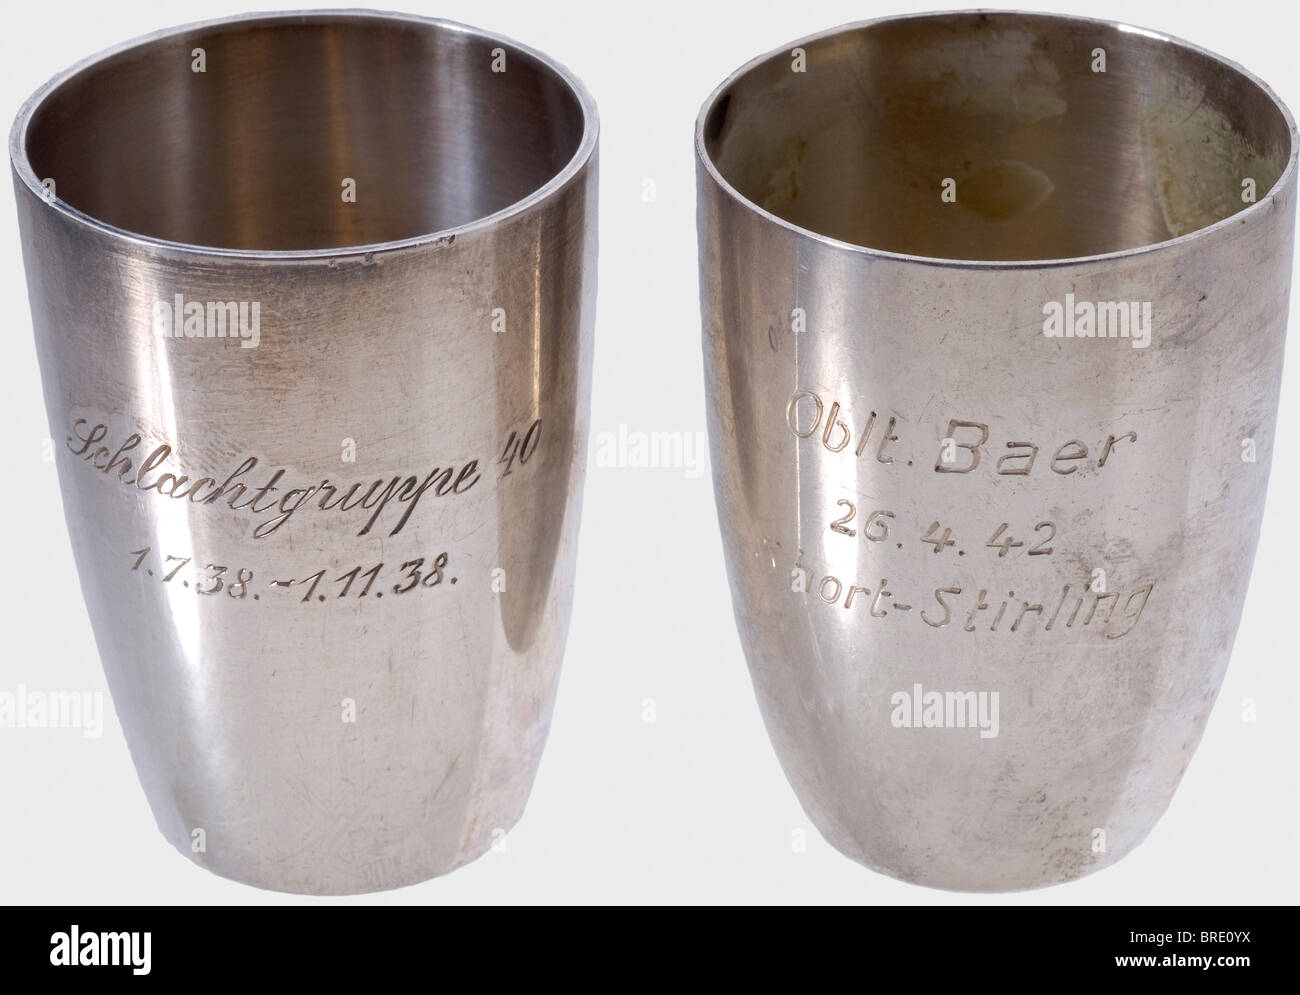 Hauptmann Baer, Commanding Officer II/NJG 5, A silver tray with eight silver beakers for night victories 1942/43 The tray with the engraved emblem of the Night Fighter Division, punched 'WTB 835'. Diameter 26.5 cm. Two of the schnapps beakers are engraved 'Olt. Baer' on the viewing side, each has a separate addendum: '26.4.42 - Short Sterling' and '29.4.42 - Vickers-Wellington'. The remaining six beakers are all engraved 'Hptm. Baer' with the addendums '20.4.43 - Lancaster' (on two beakers), '21.4.43 - Lancaster', '29.4.43 - Short Sterling', '4.7.43 - Vickers-W, Stock Photo